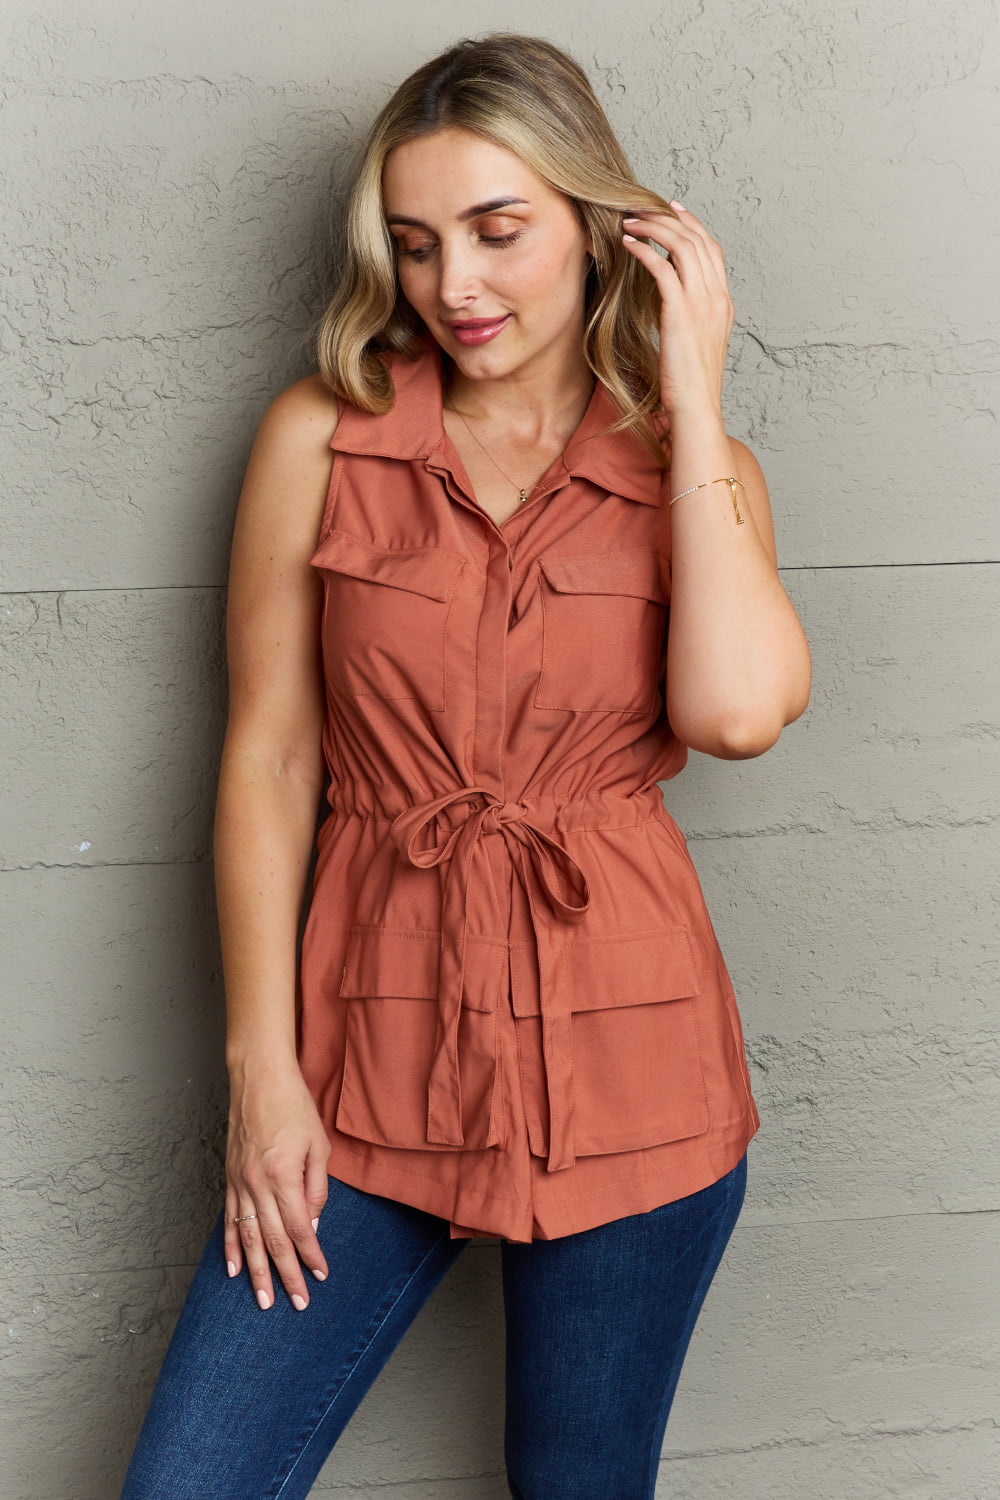 Follow The Light Sleeveless Collared Button Down Top in Brick Red